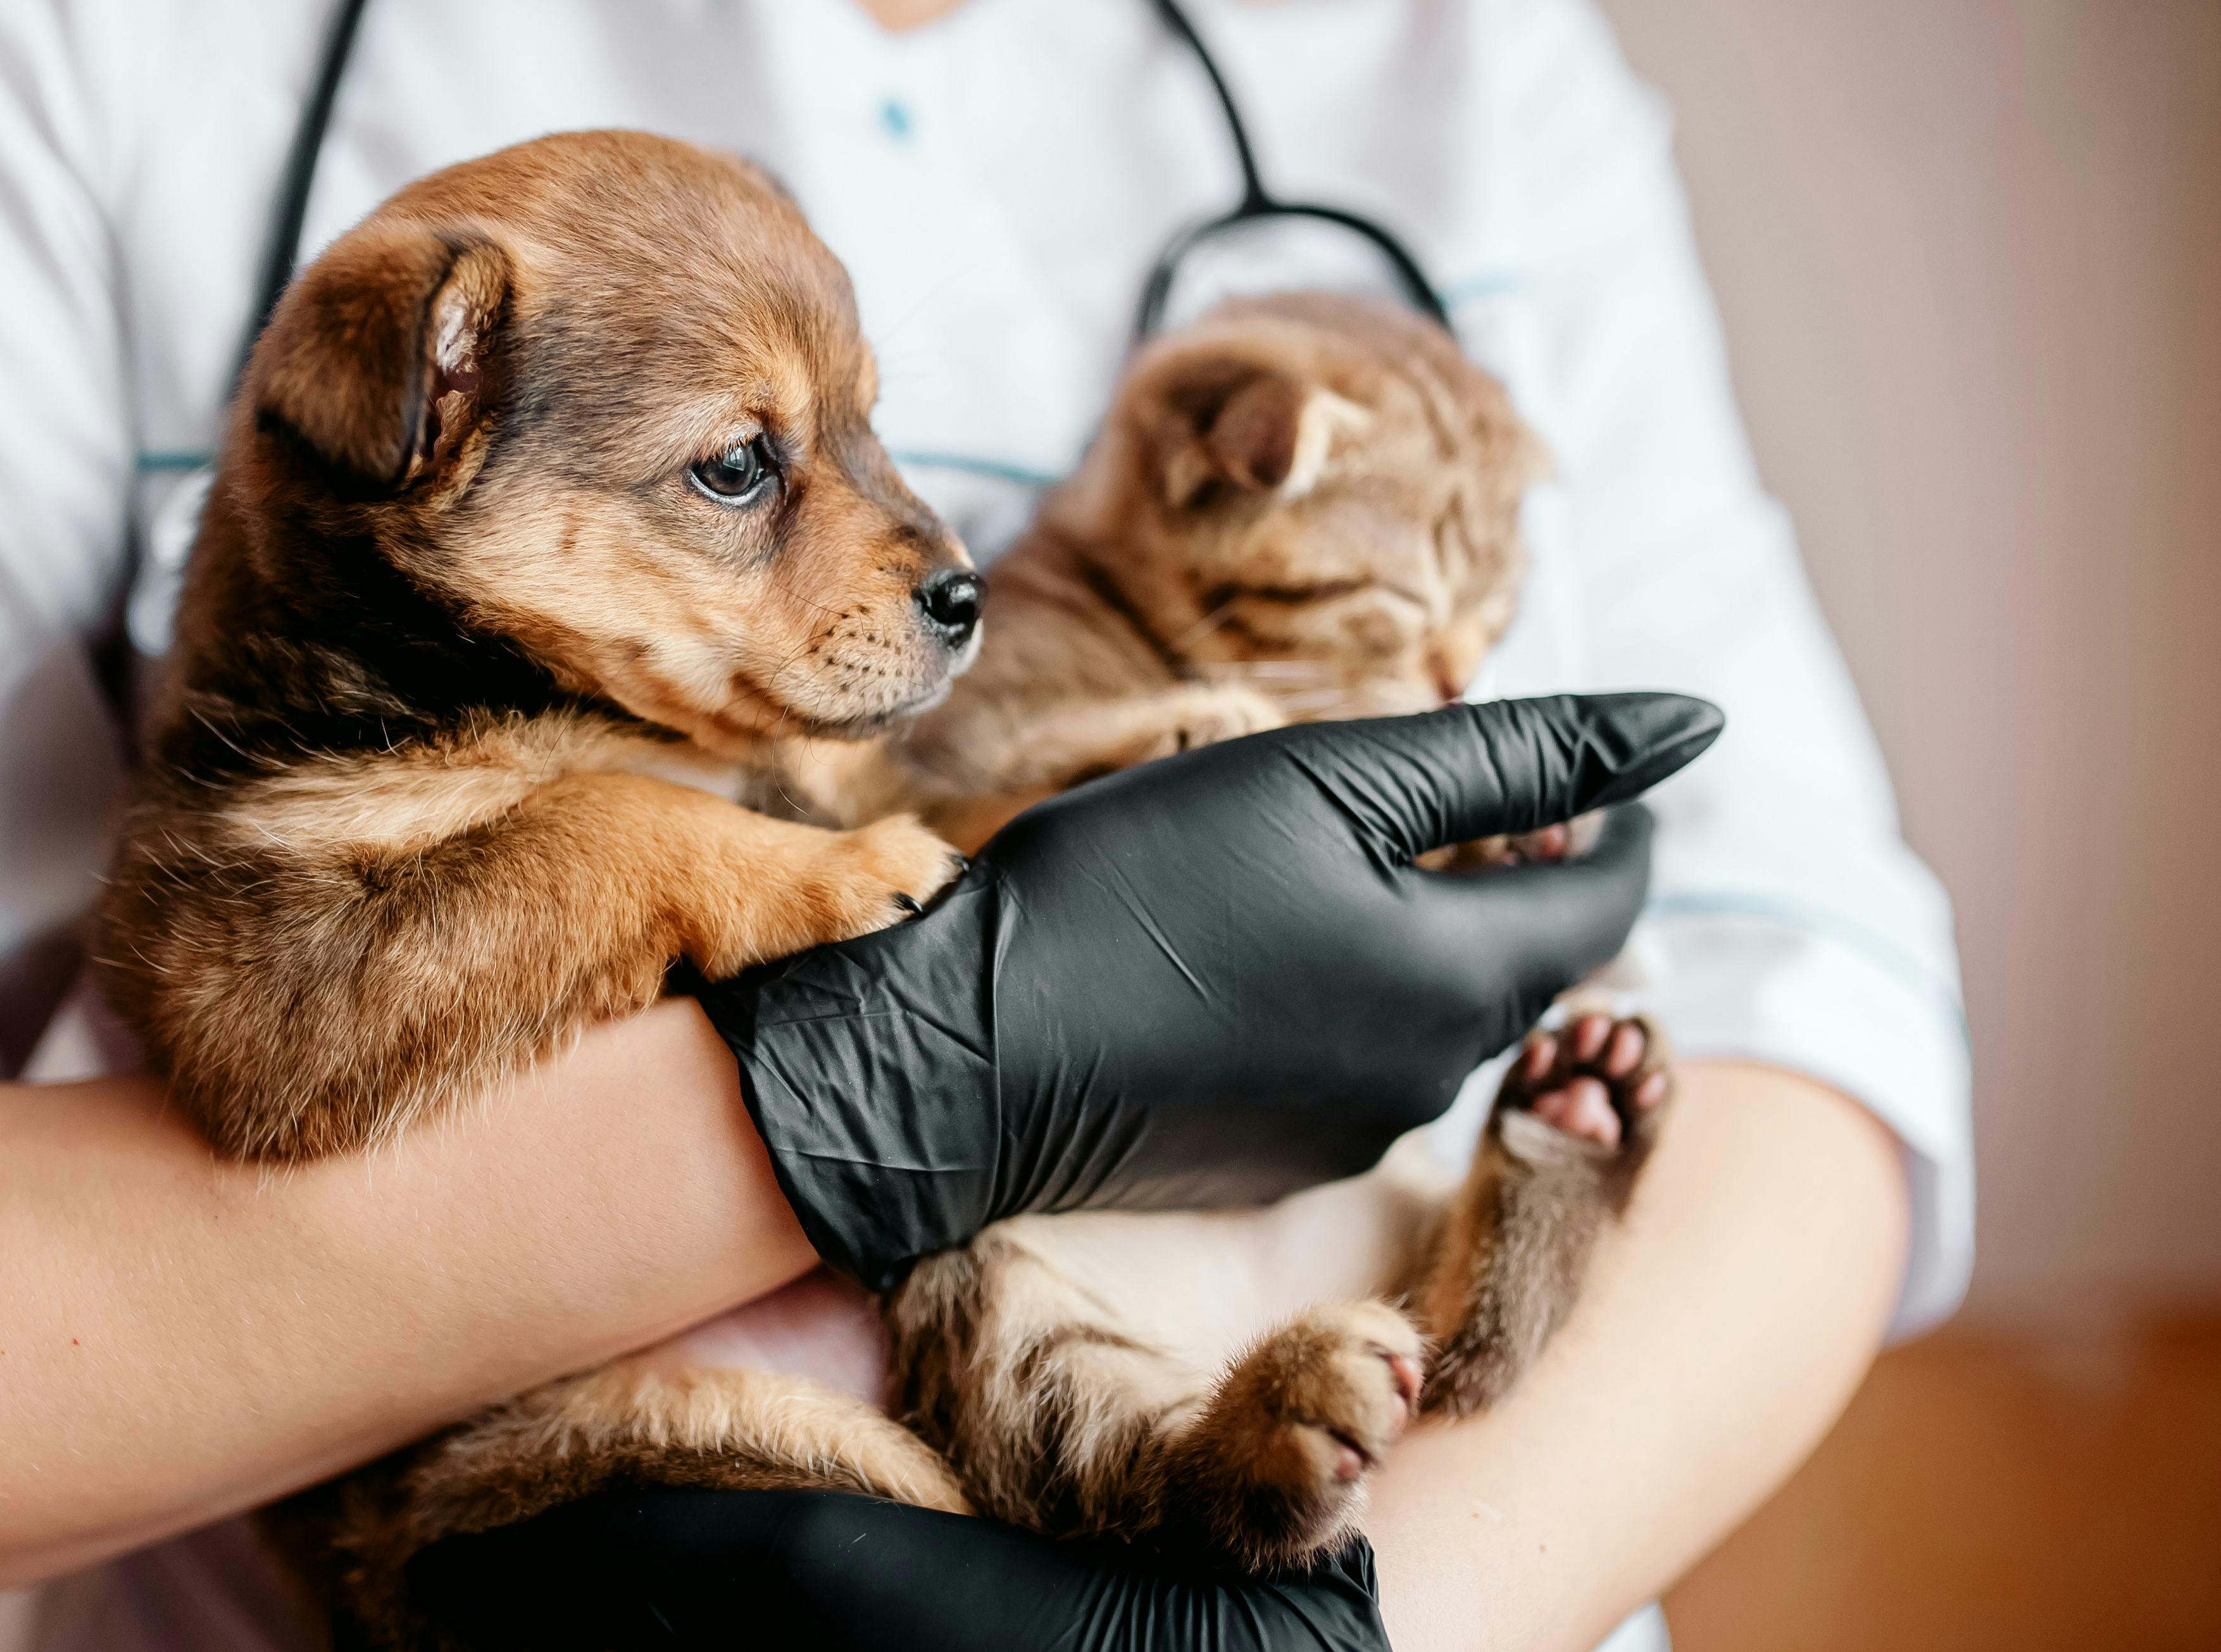 dermatitis research cat and dog